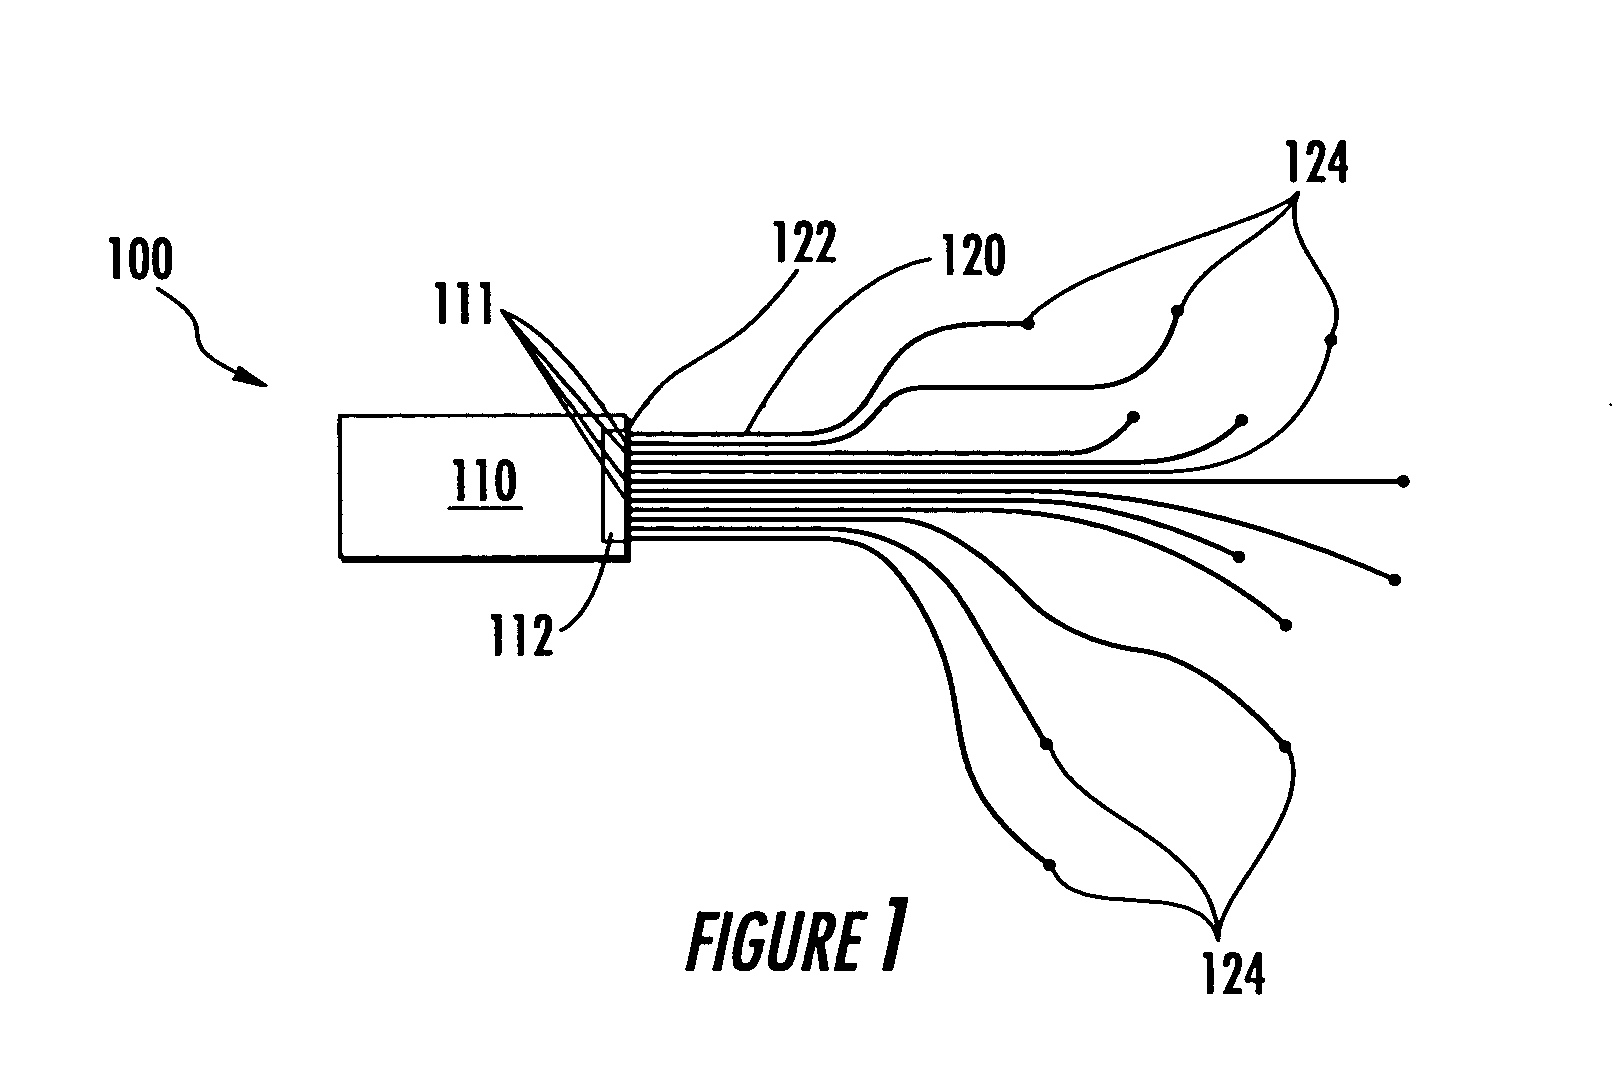 Apparatus and methods for using fiber optic arrays in optical communication systems